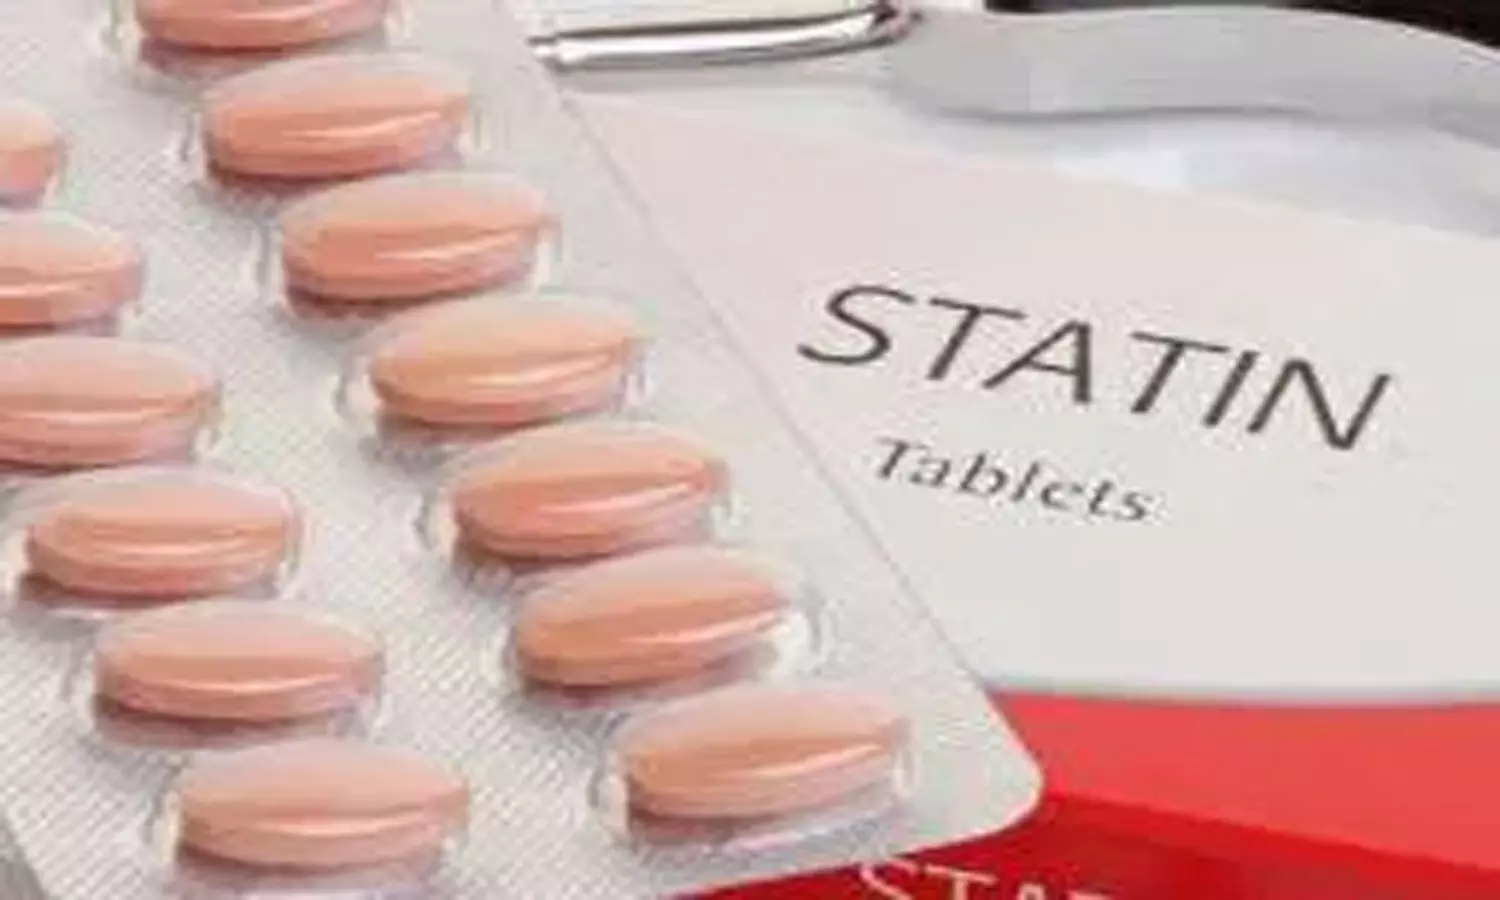 Statin may stop cancer progression by starving cancer cells to death